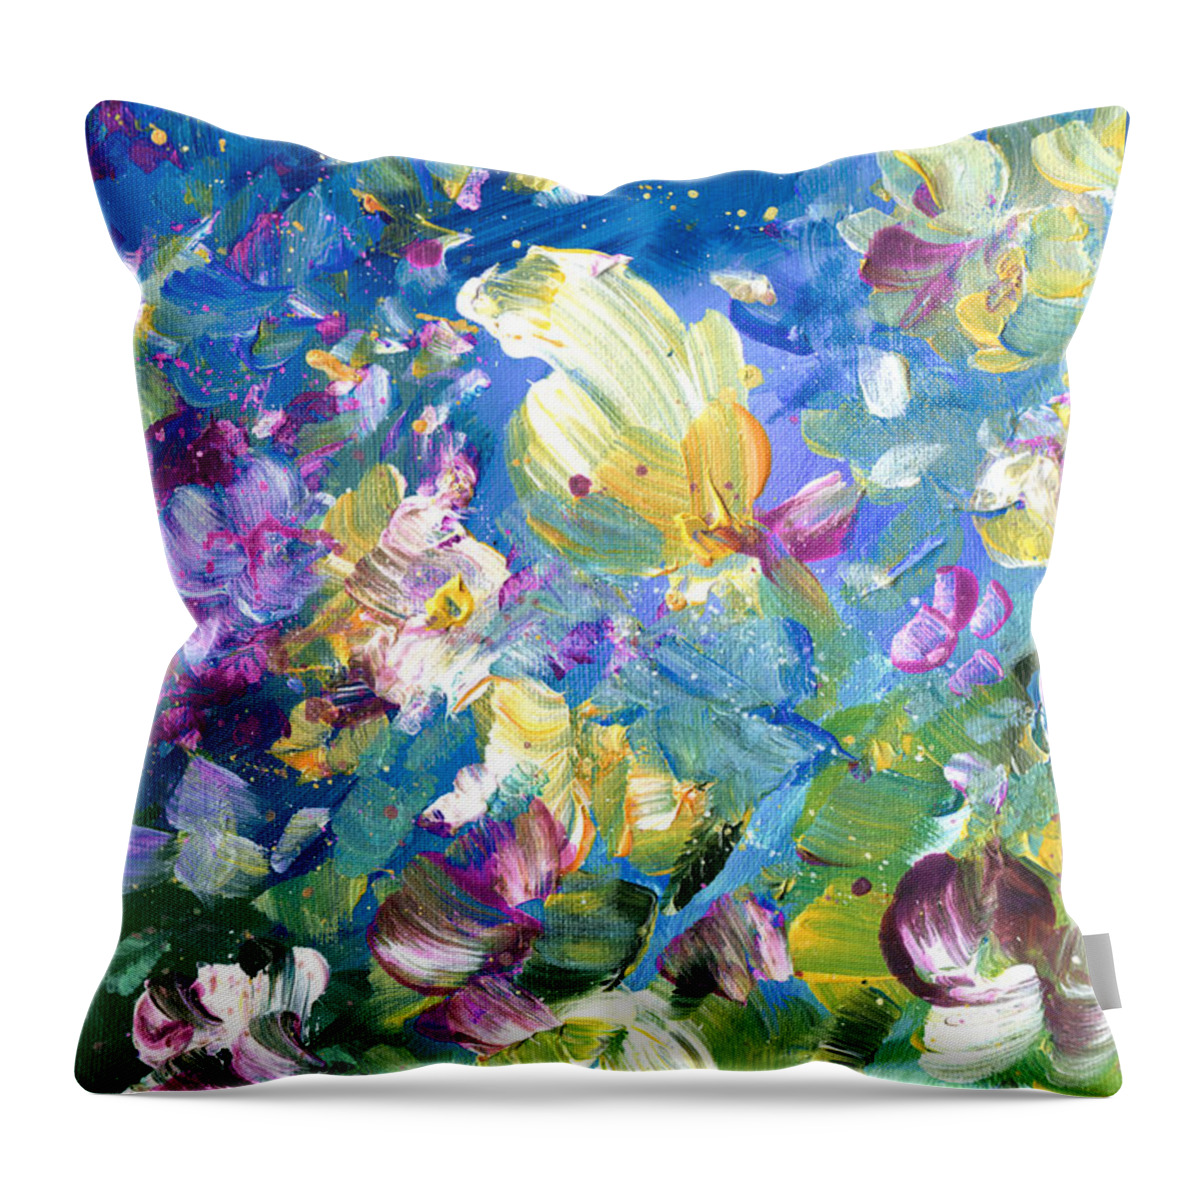 Flower Throw Pillow featuring the painting Explosion Of Joy 22 Dyptic 01 by Miki De Goodaboom